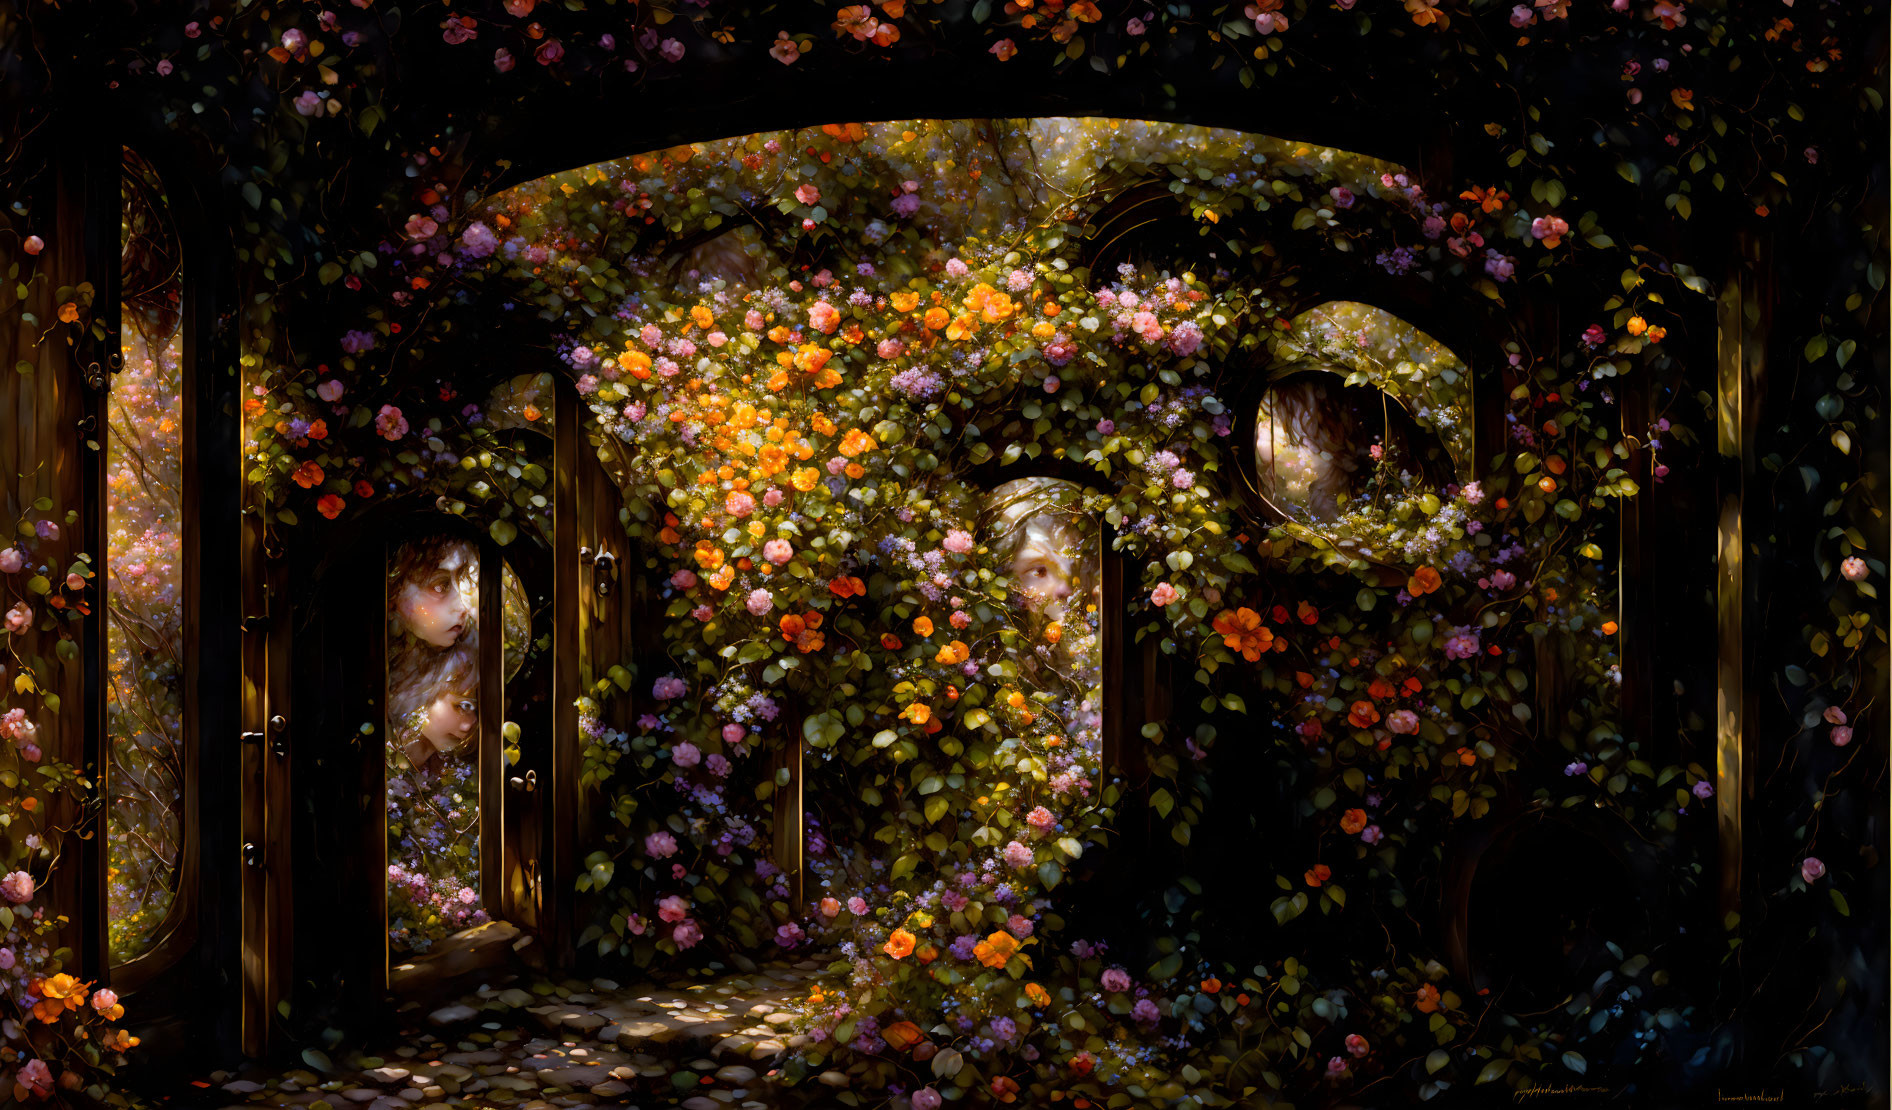 Magical archway with lush greenery and vibrant flowers featuring mysterious faces